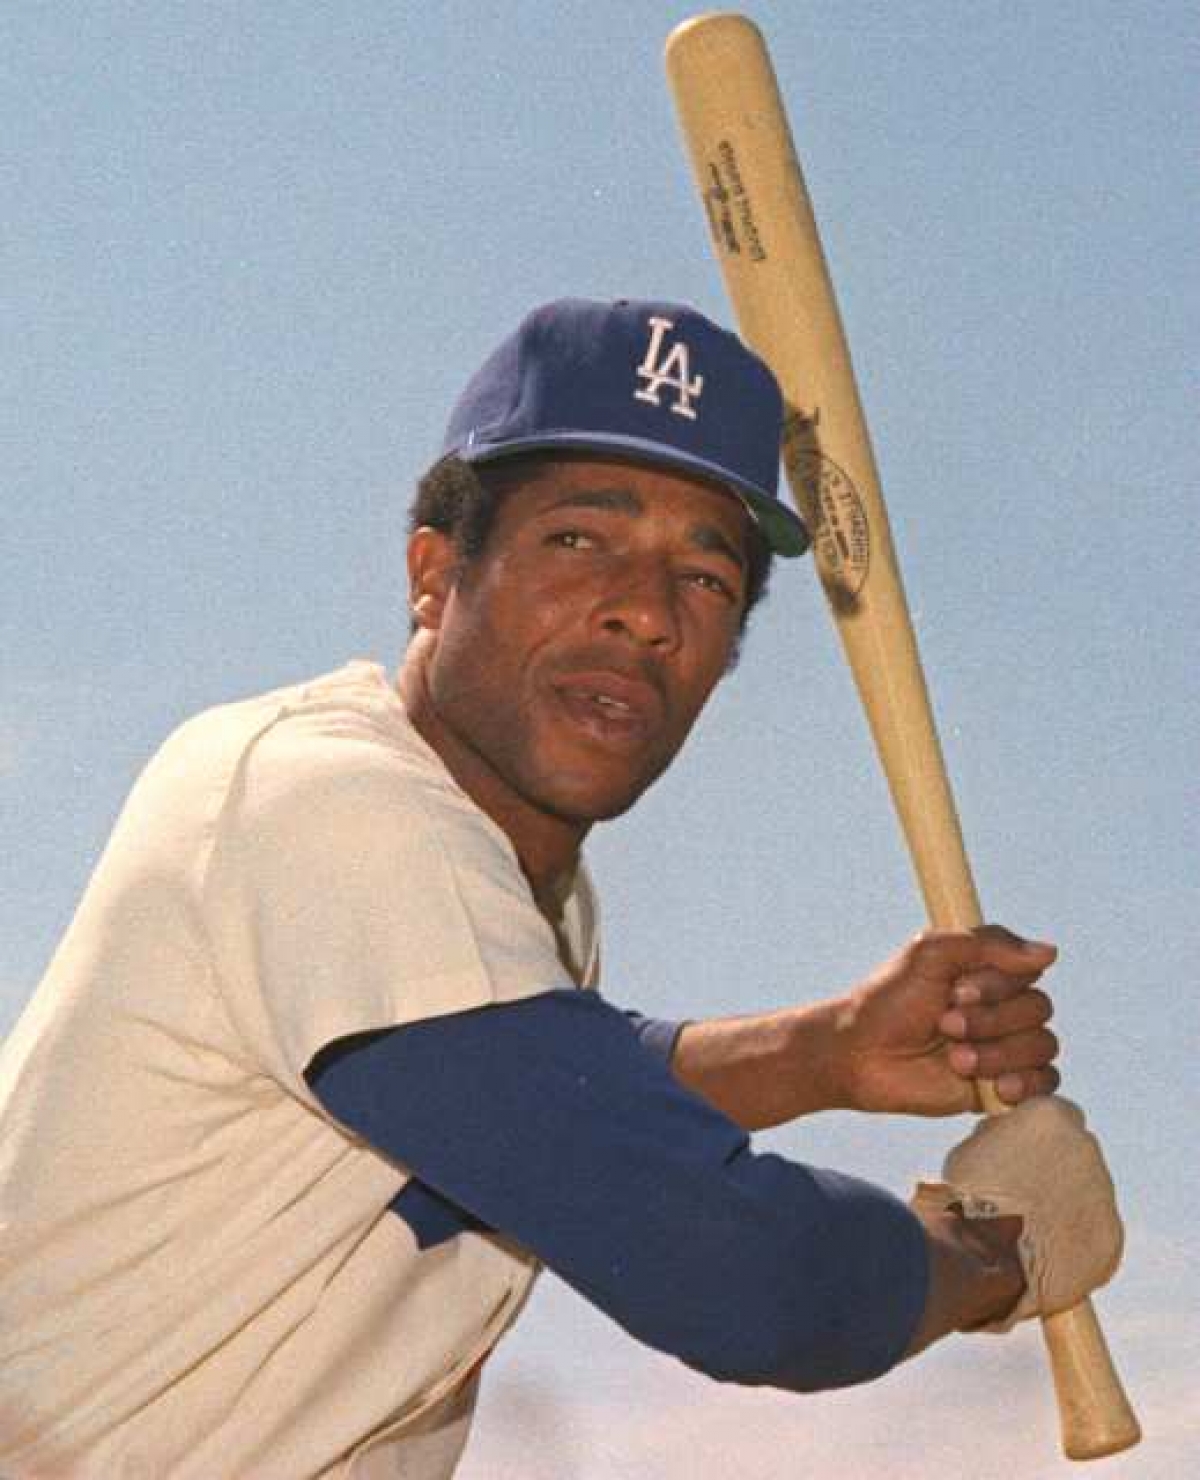 Not in Hall of Fame - 148. Willie Davis